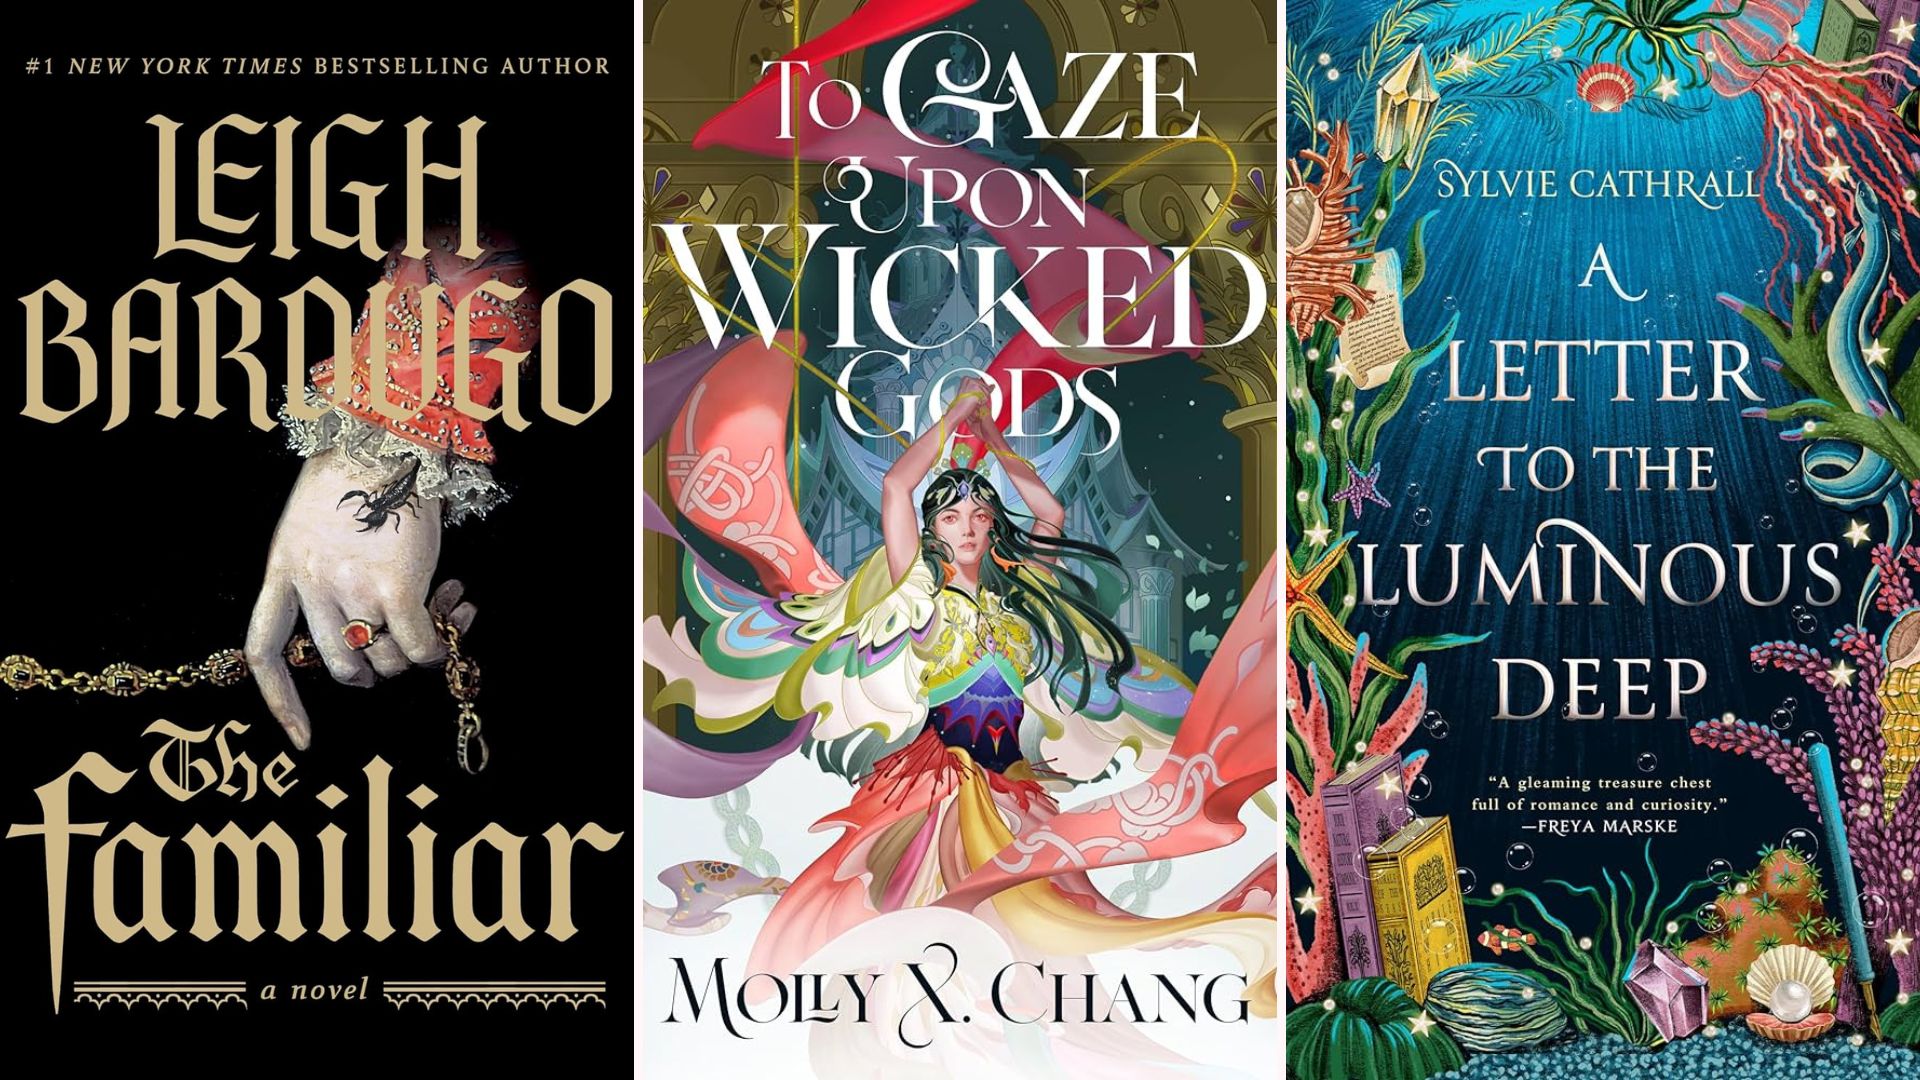 Book covers for The Familiar, To Gaze Upon Wicked Gods, and A Letter to the Luminous Deep